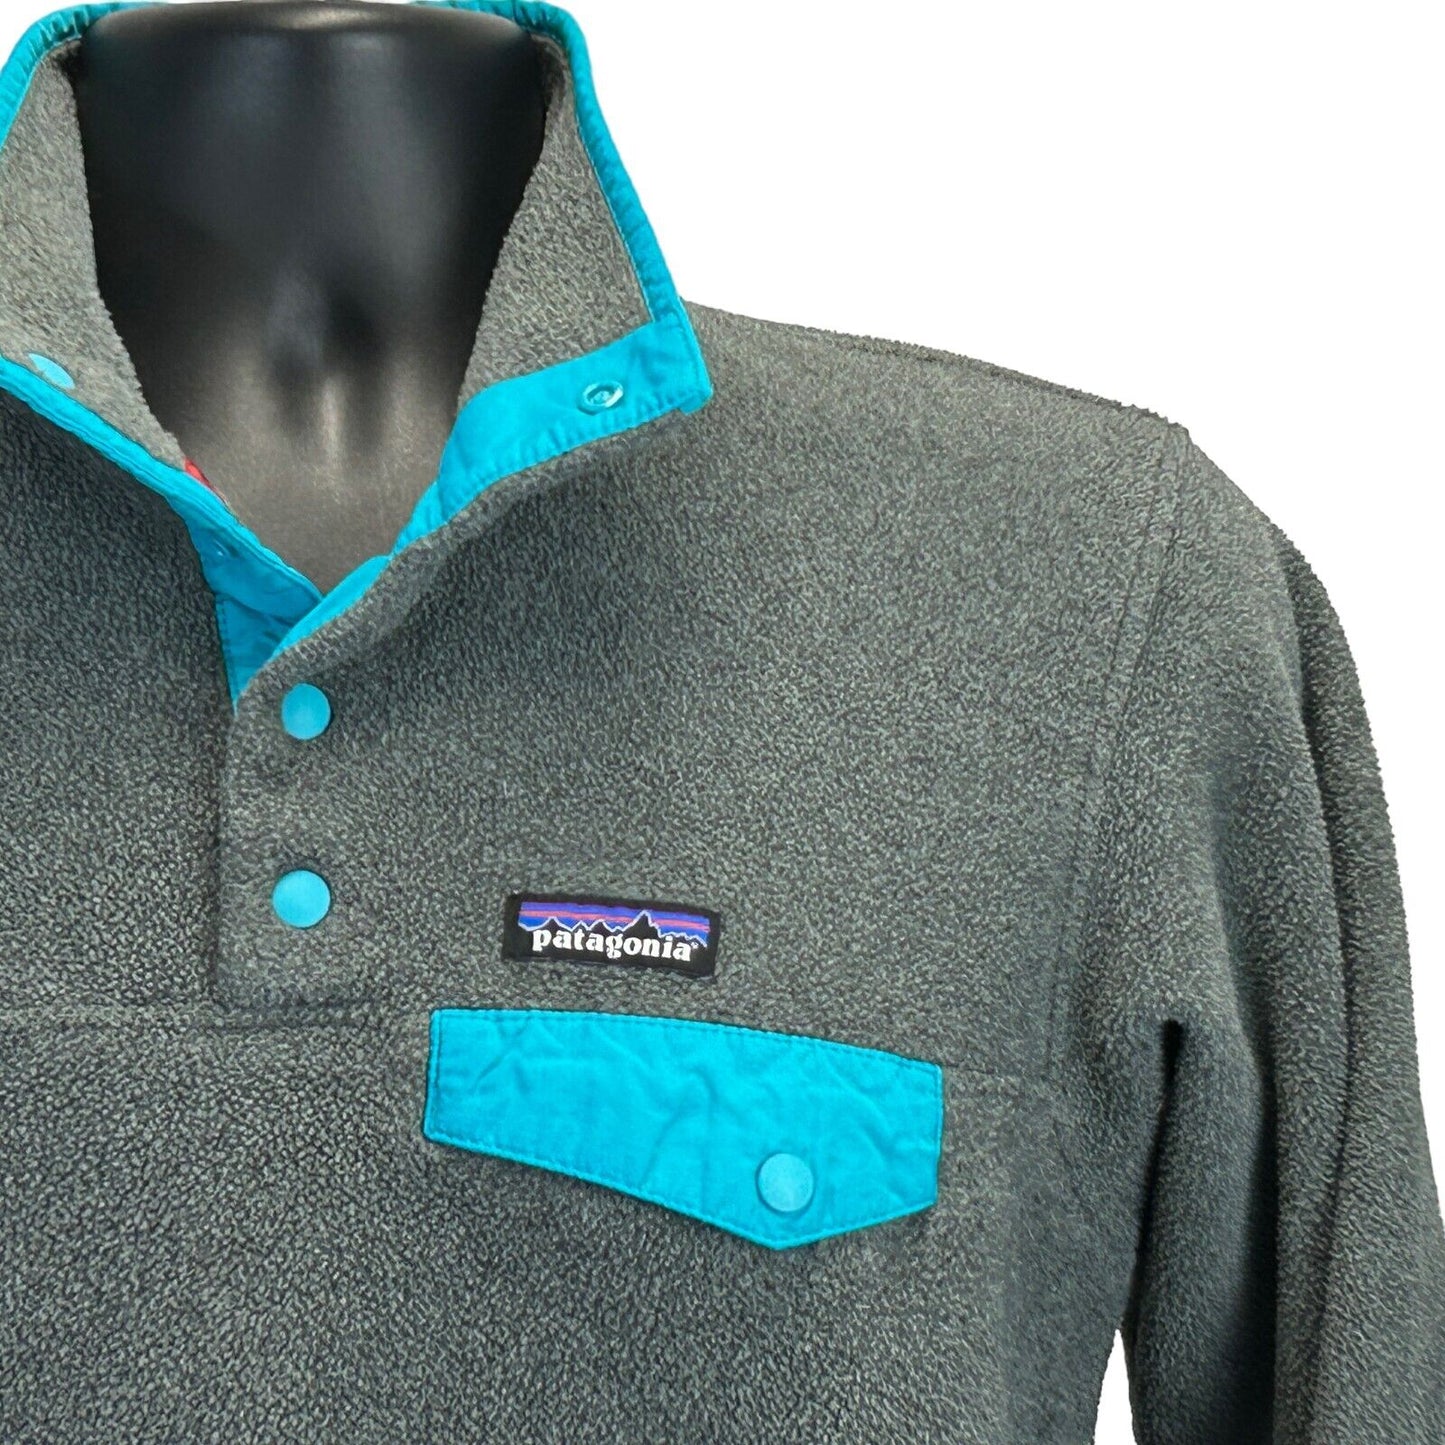 Patagonia Synchilla Henley Fleece Jacket Sweater Gray Teal Snaps Pocket Small